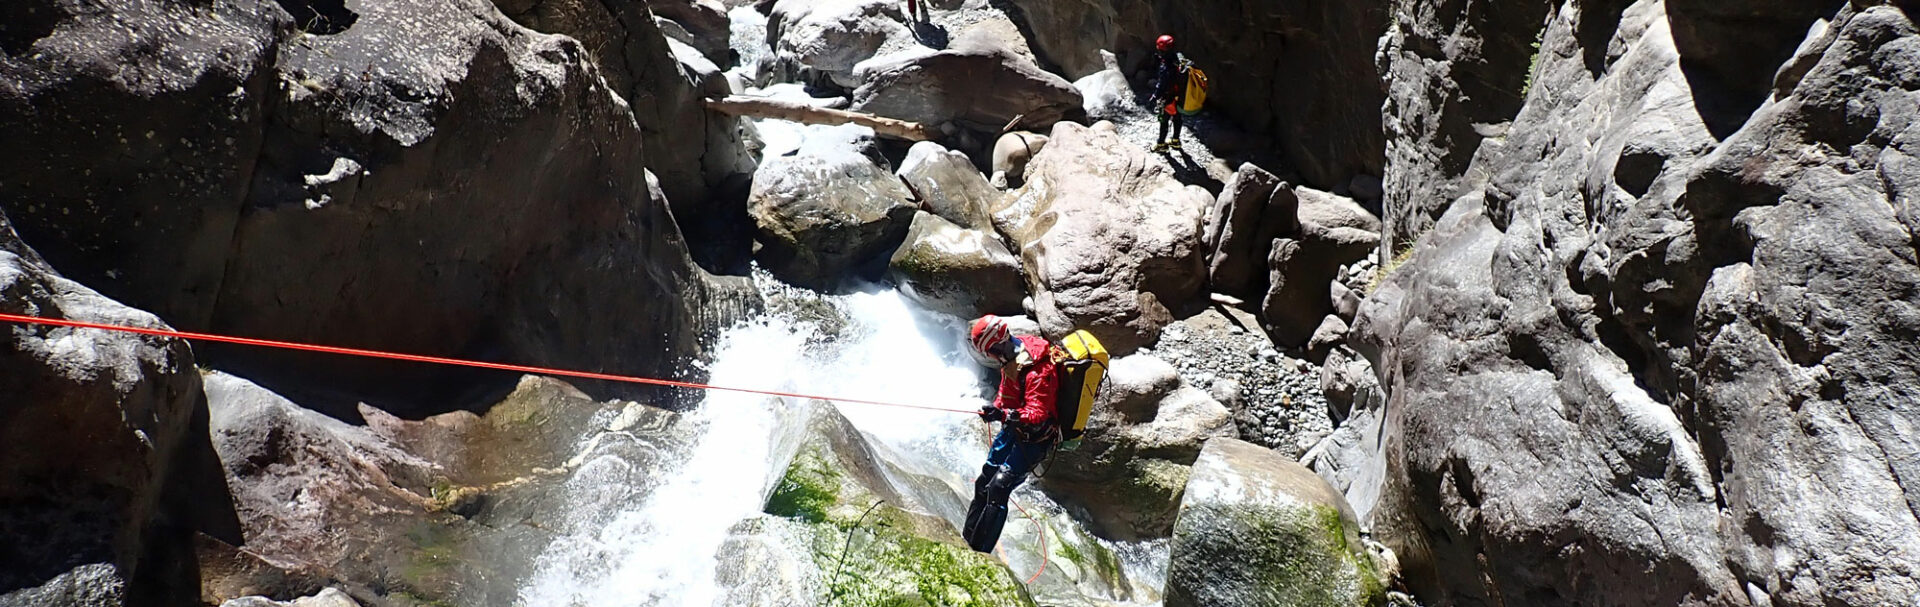 stage canyoning annecy